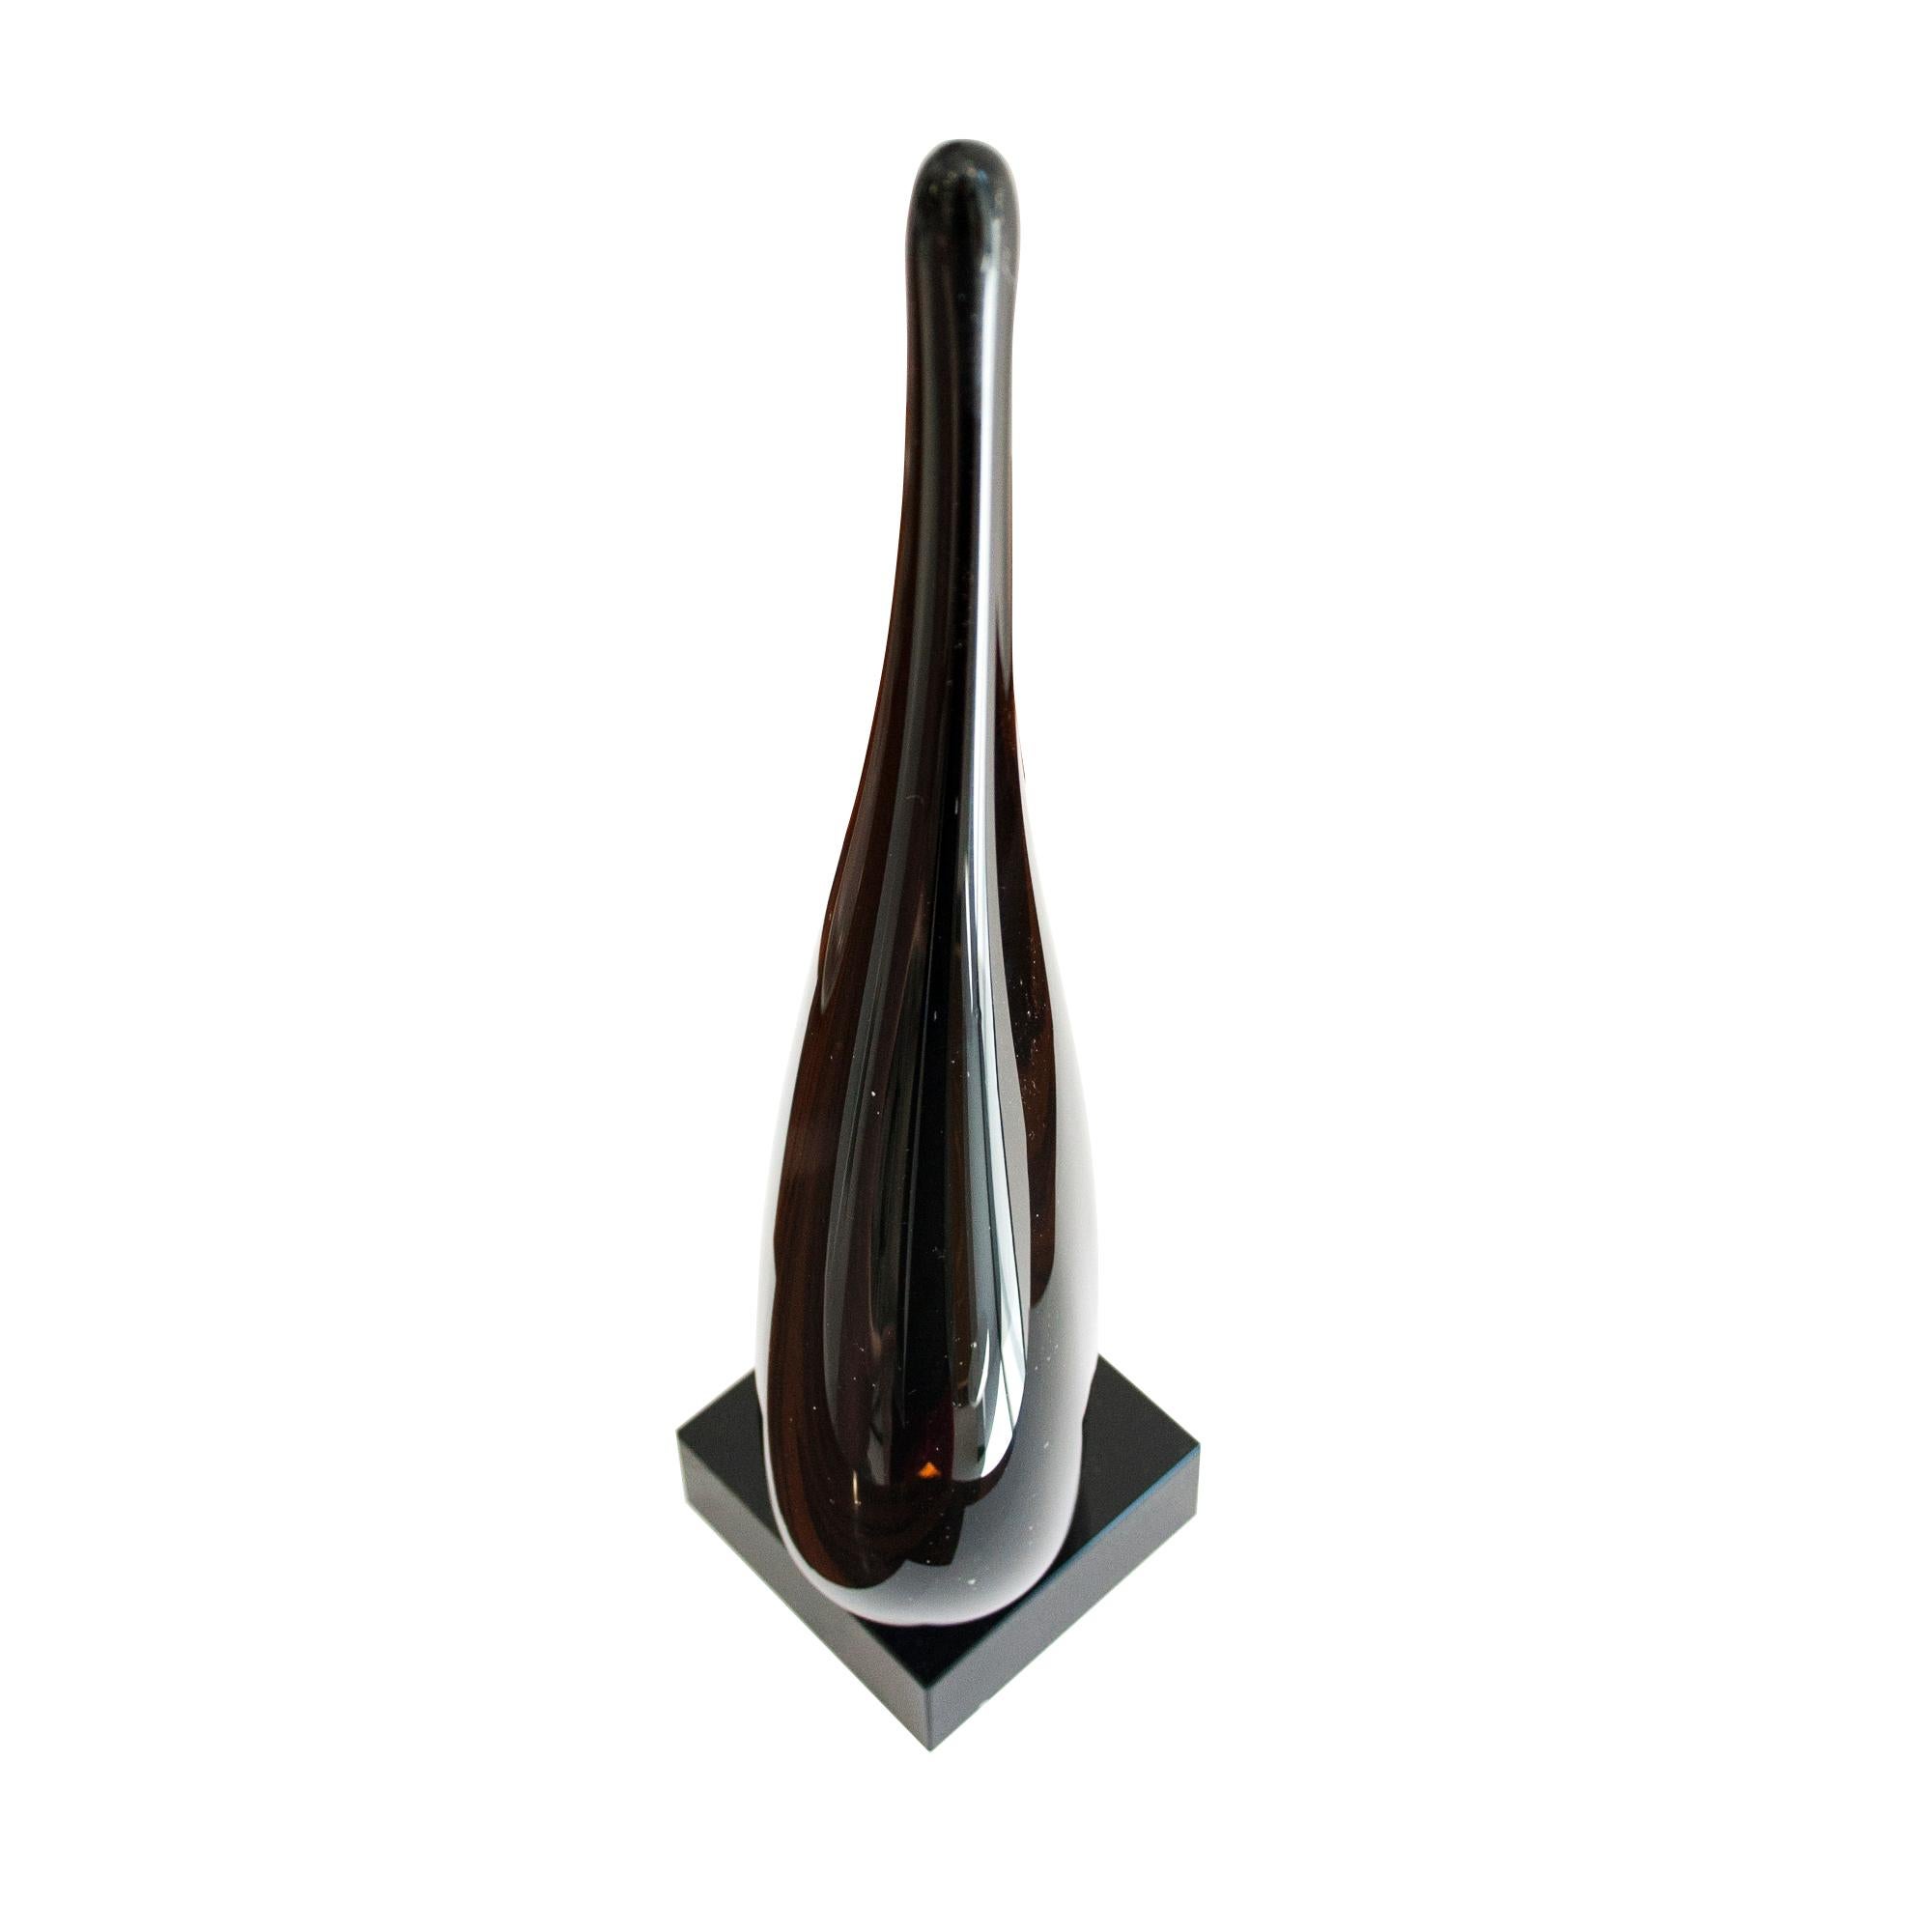 Hand-Crafted Mid-Century Modern Flavio Poli Style Black Murano Glass Sculpture, Italy, 1970 For Sale